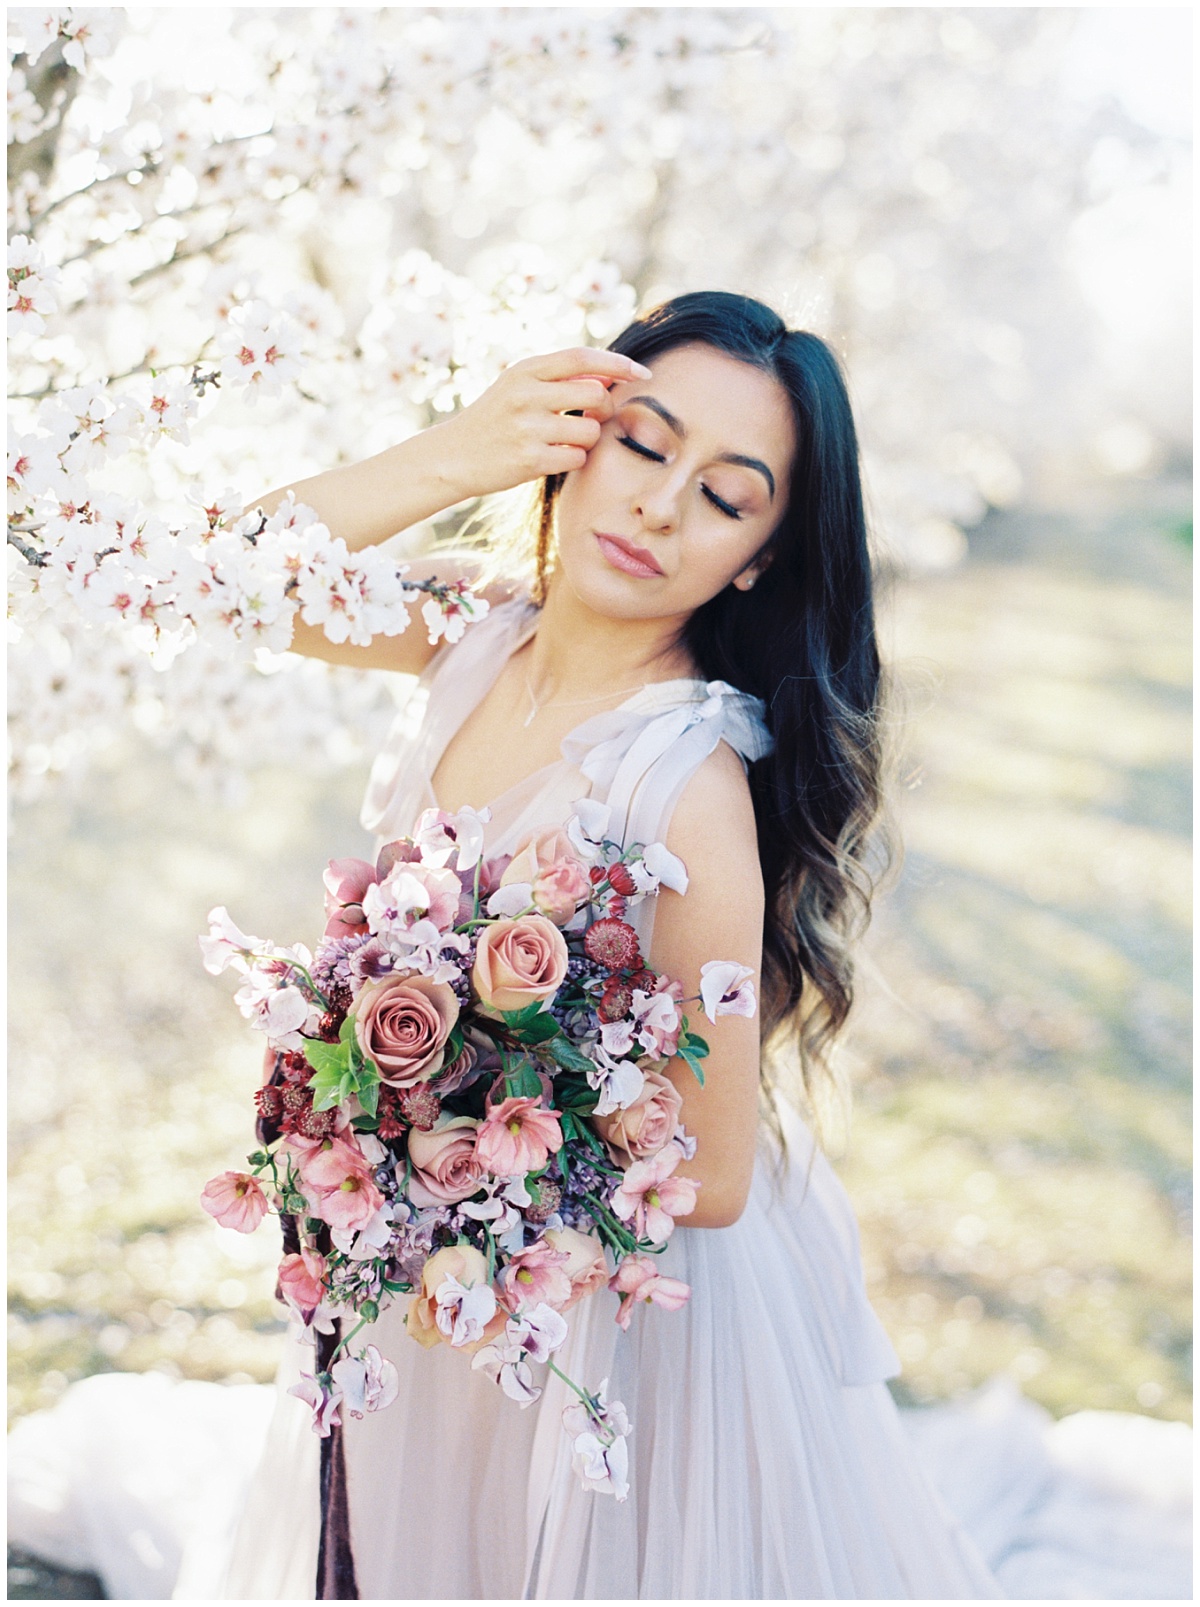 Ethereal Almond Blossom Photos